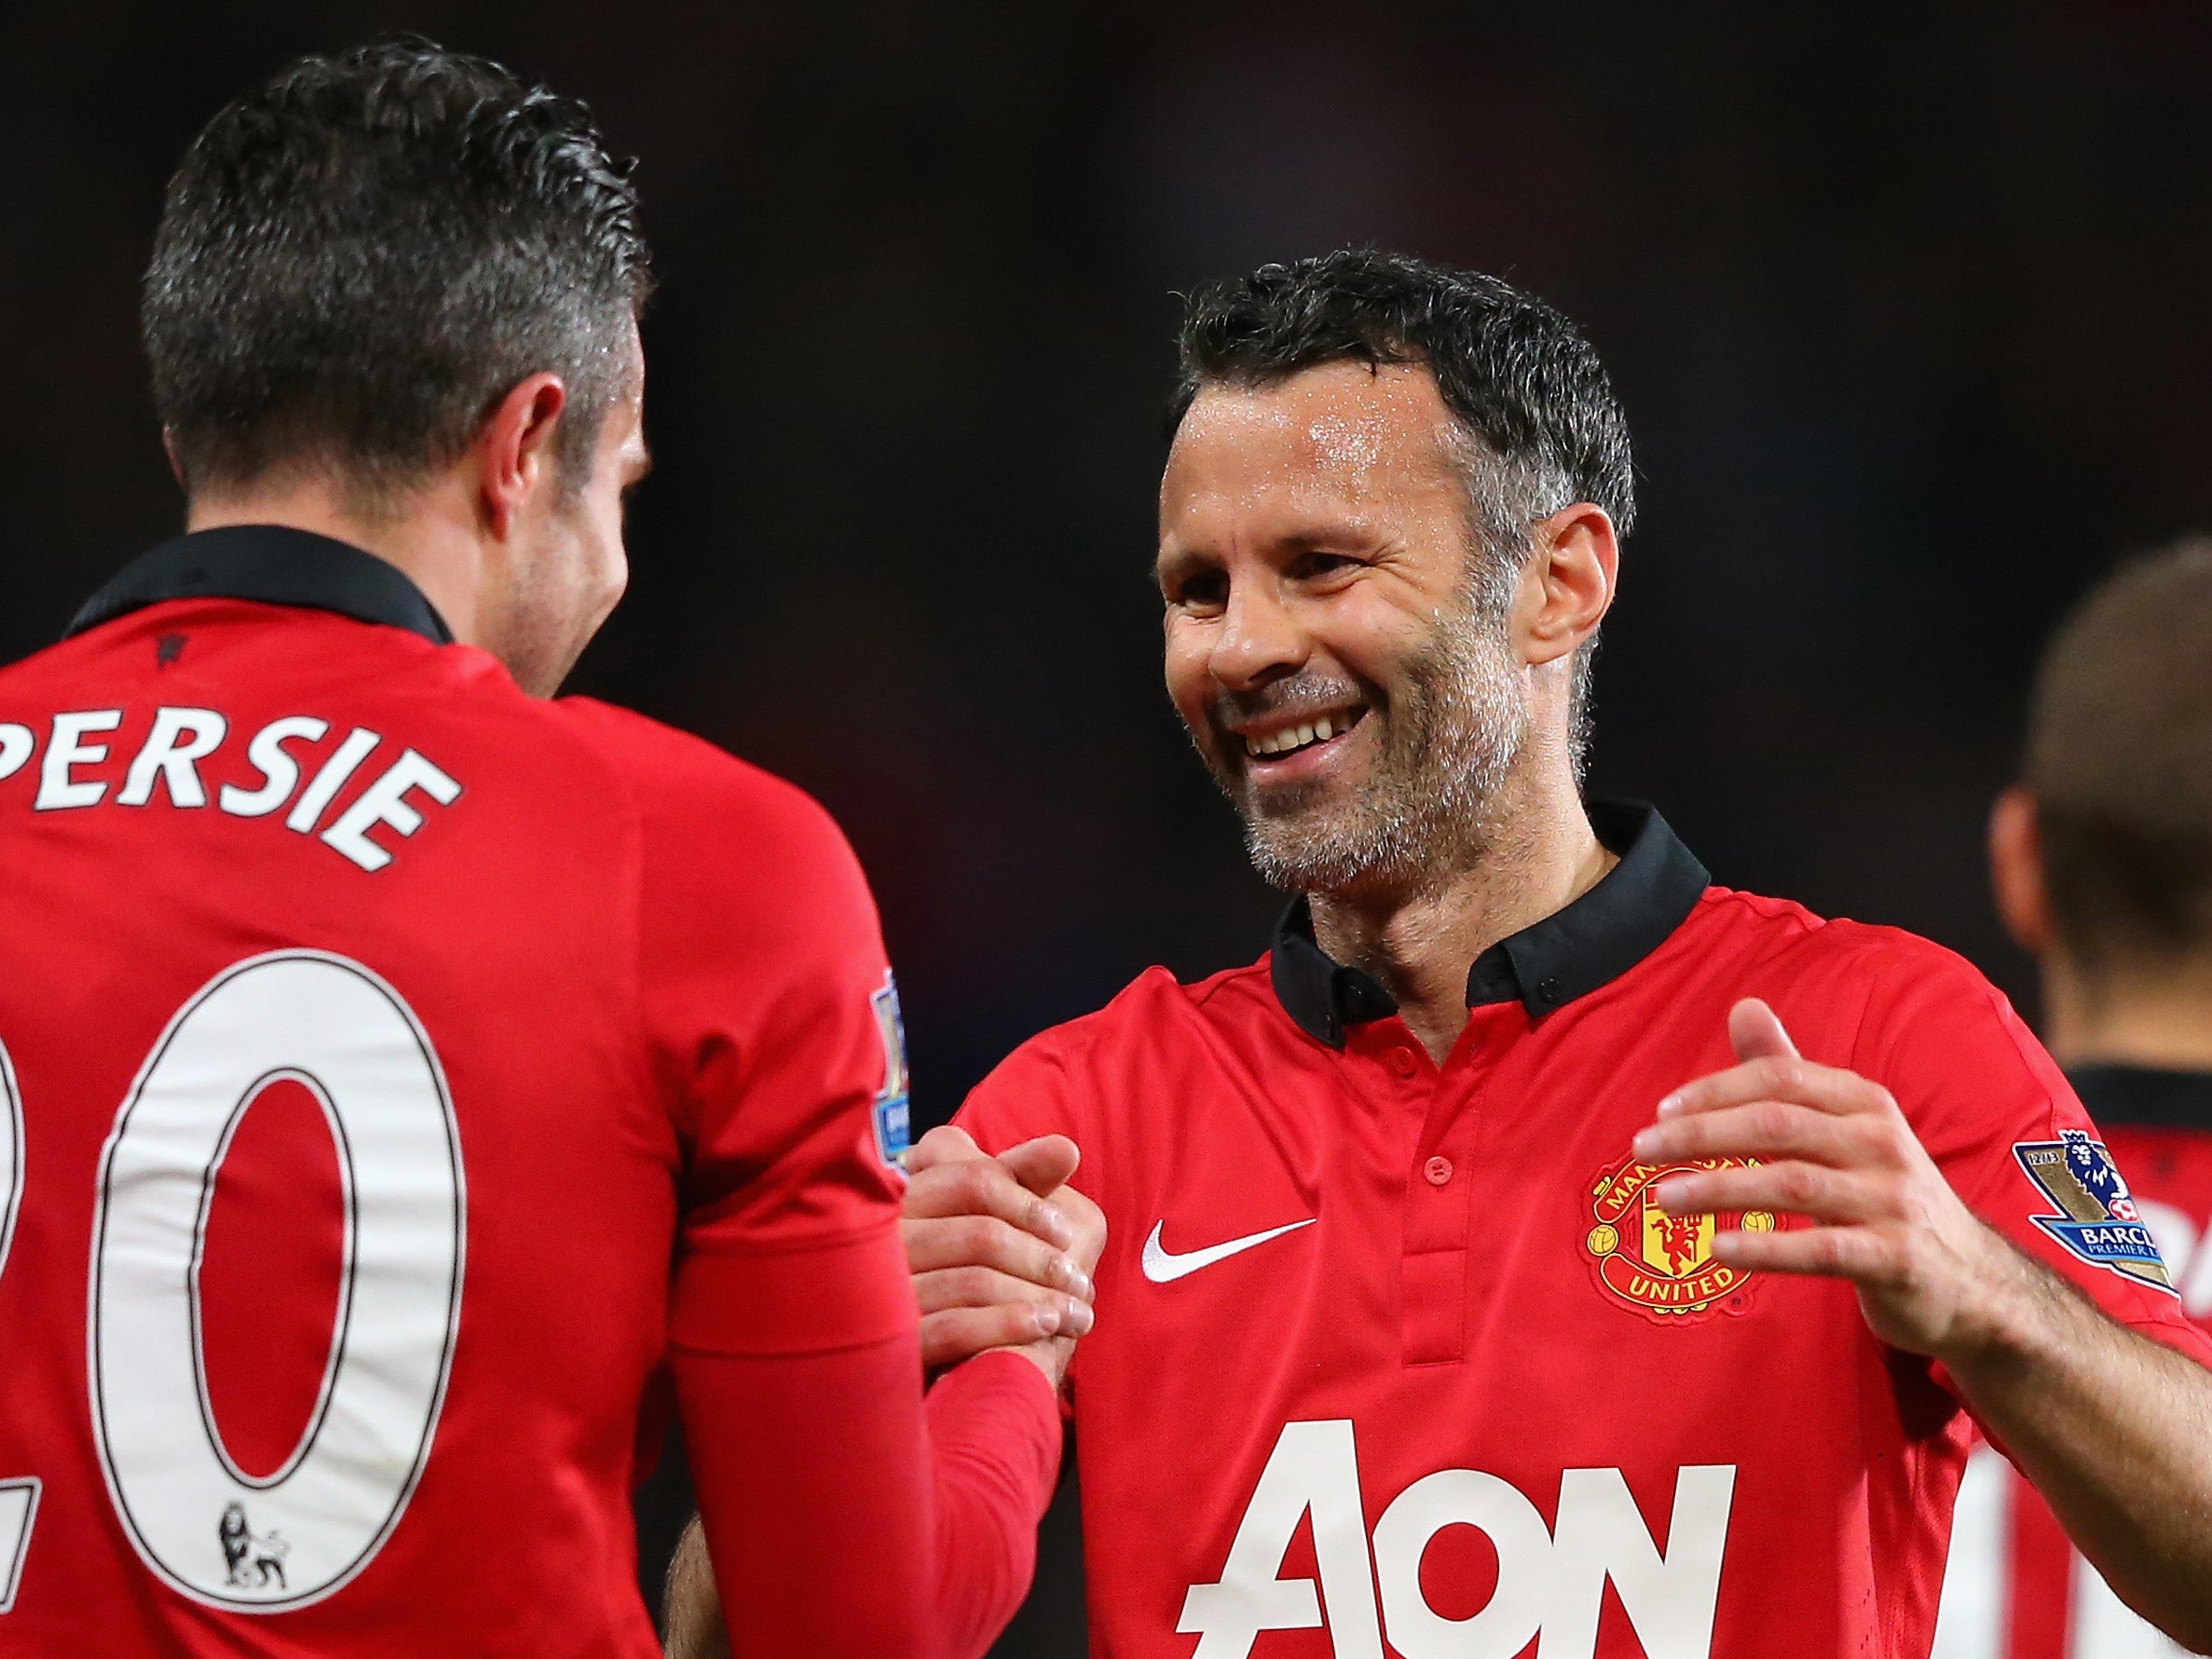 Giggs cited yoga as his way of staying fit in his 30s